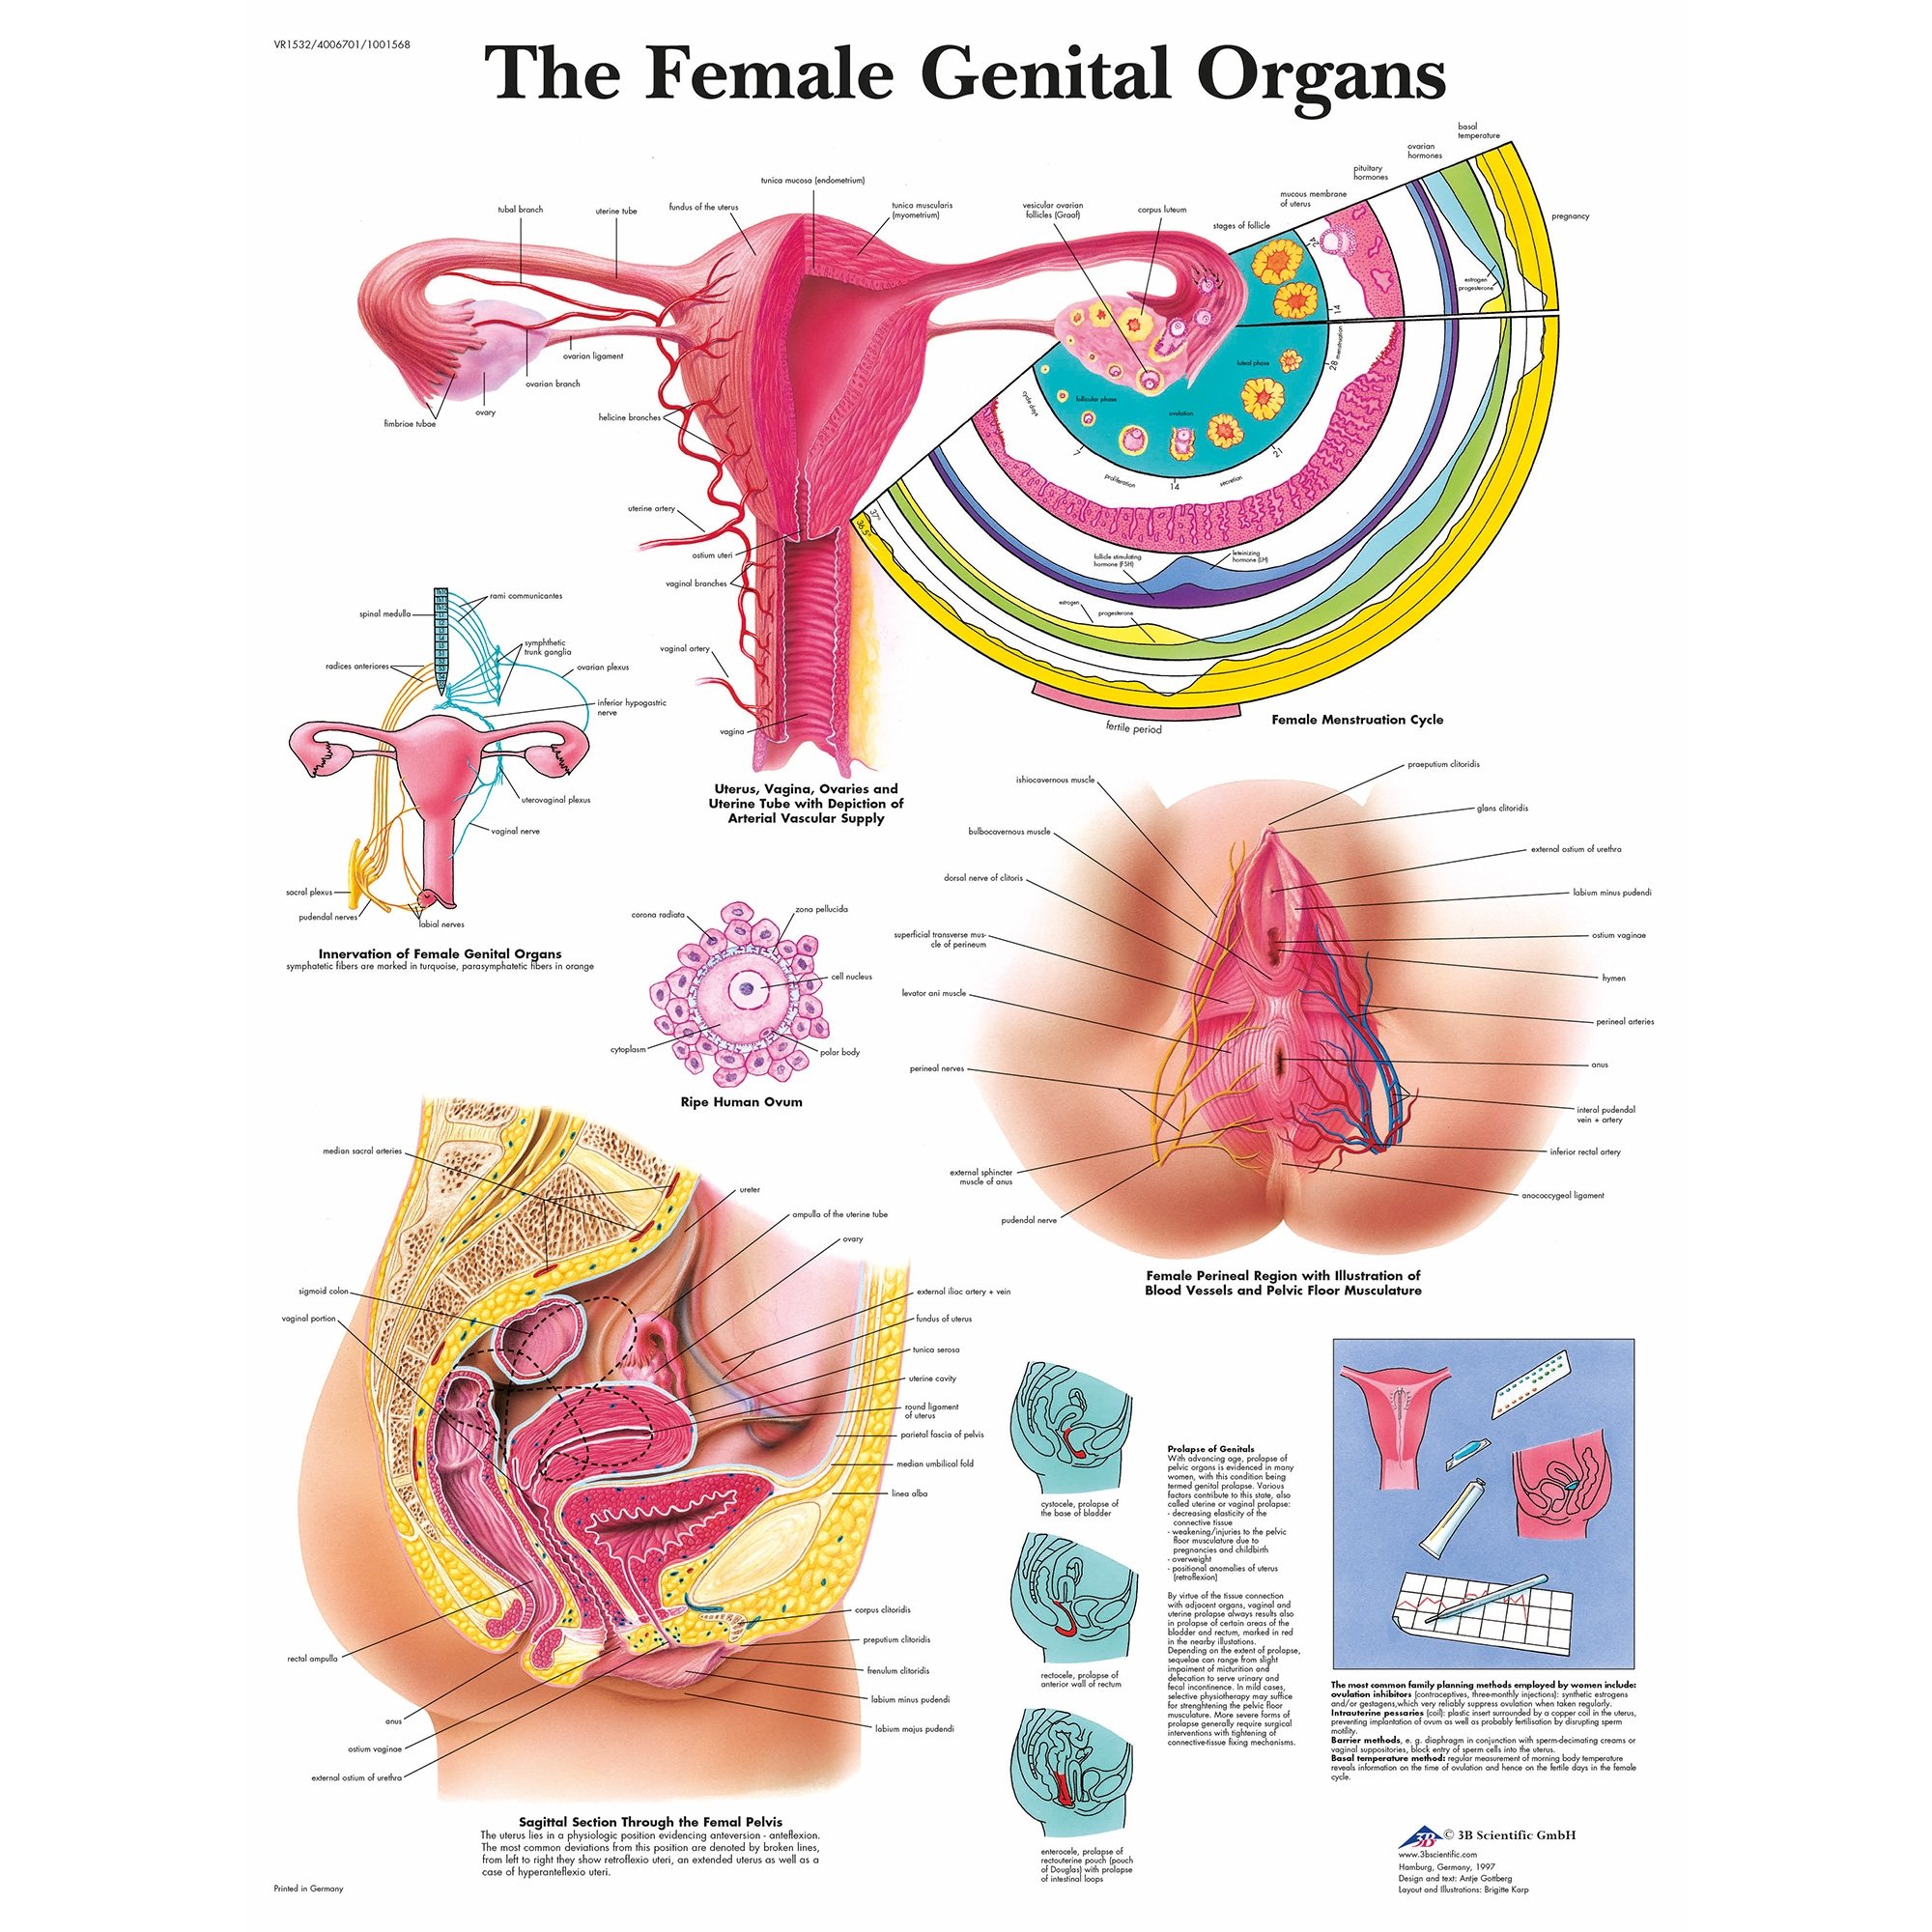 Collection 93+ Images medical pictures of female genitalia Full HD, 2k, 4k